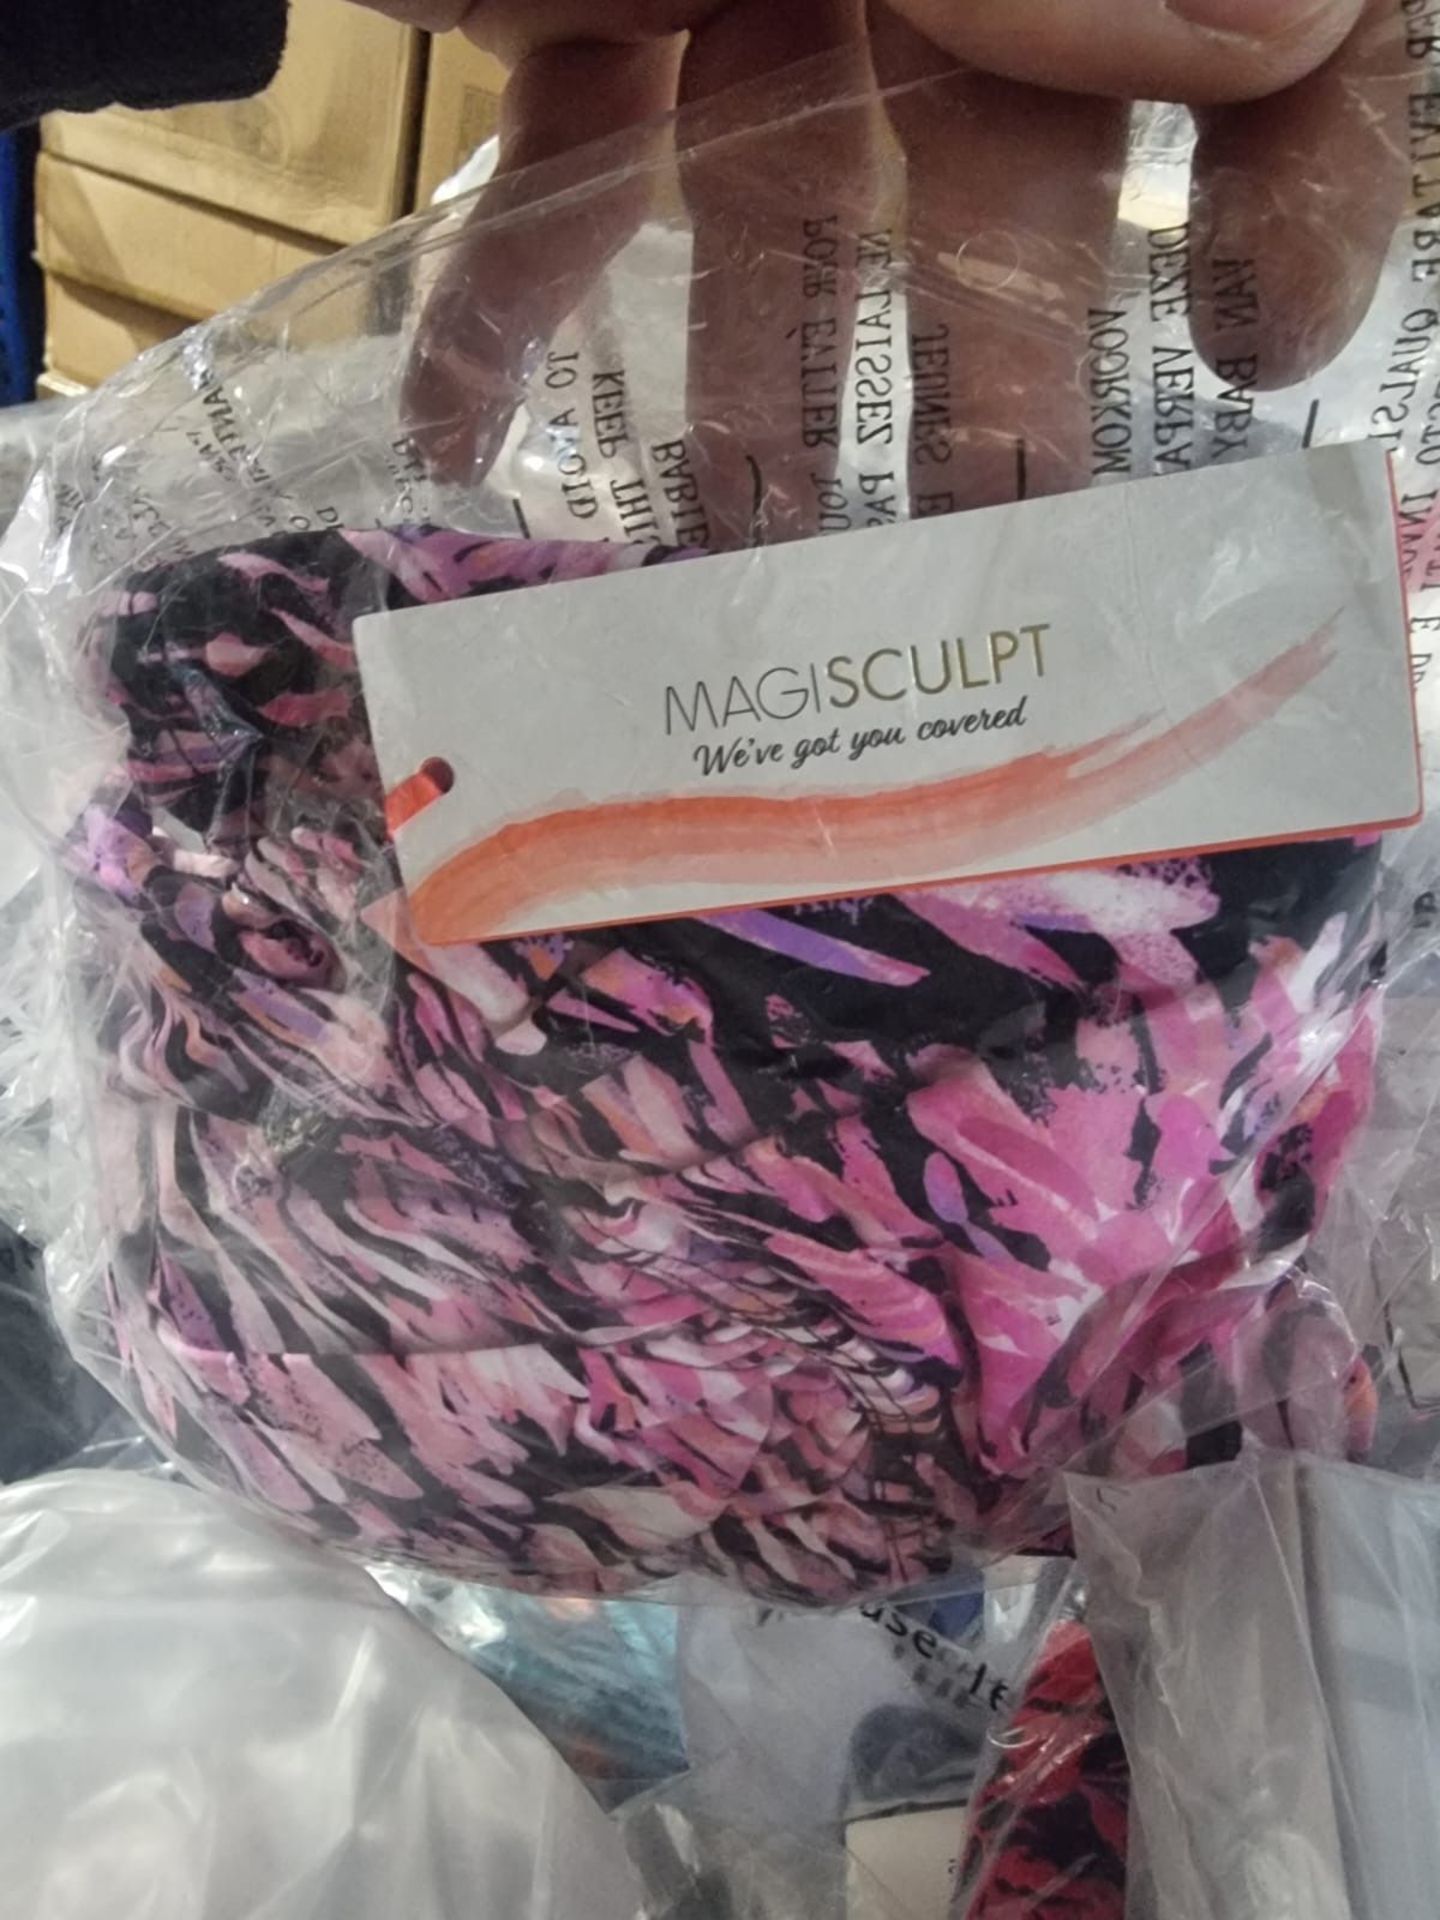 100 x NEW PACKAGED ASSORTED SWIM & UNDERWEAR FROM BRAND SUCH AS WONDERBRA, BOUX AVENUE, ANN SUMMERS, - Image 18 of 53